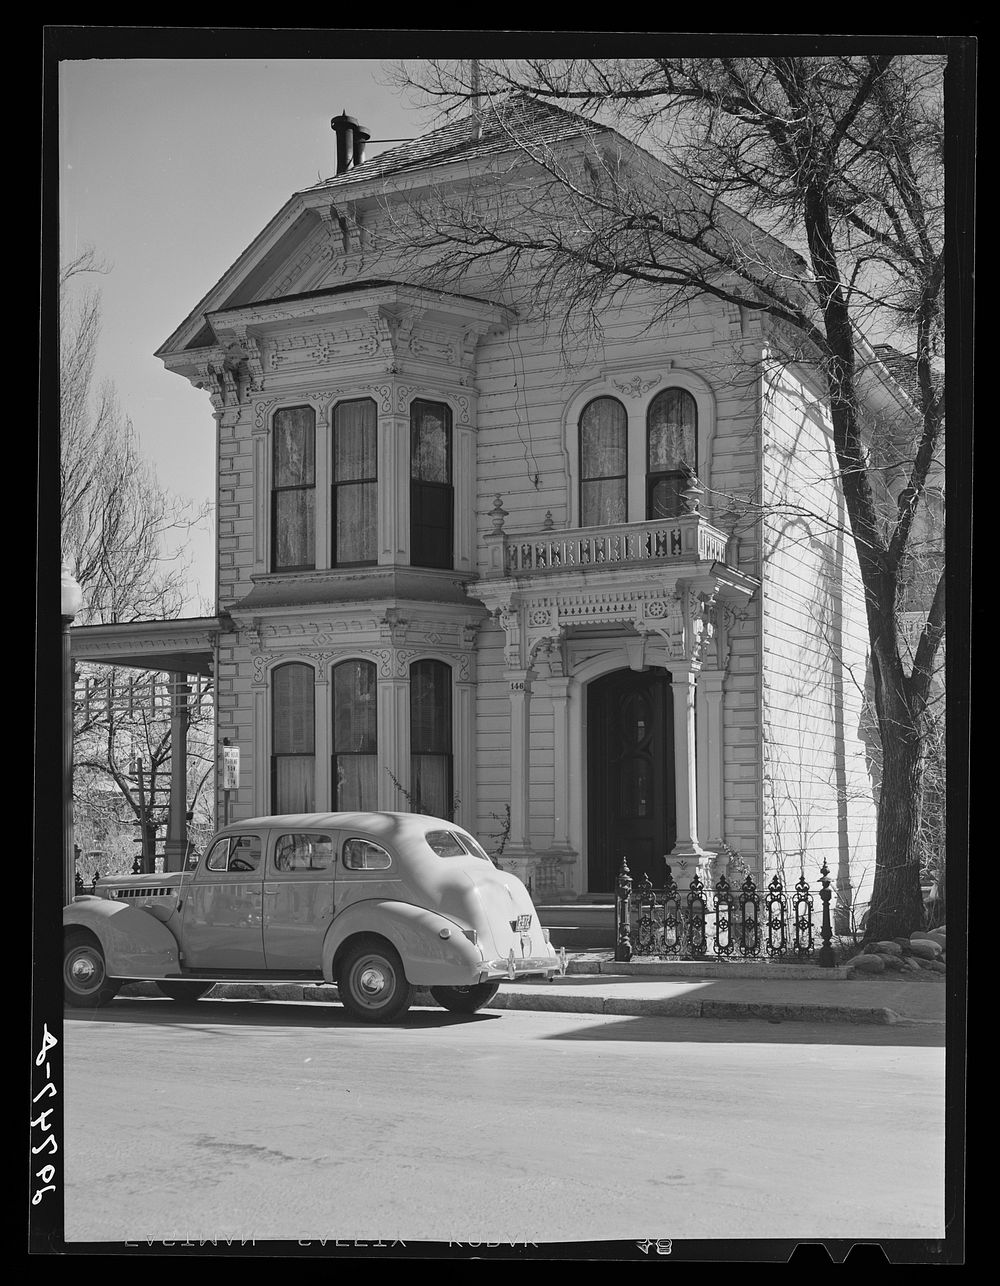 [Untitled photo, possibly related to: Architectural detail. Reno, Nevada]. Sourced from the Library of Congress.